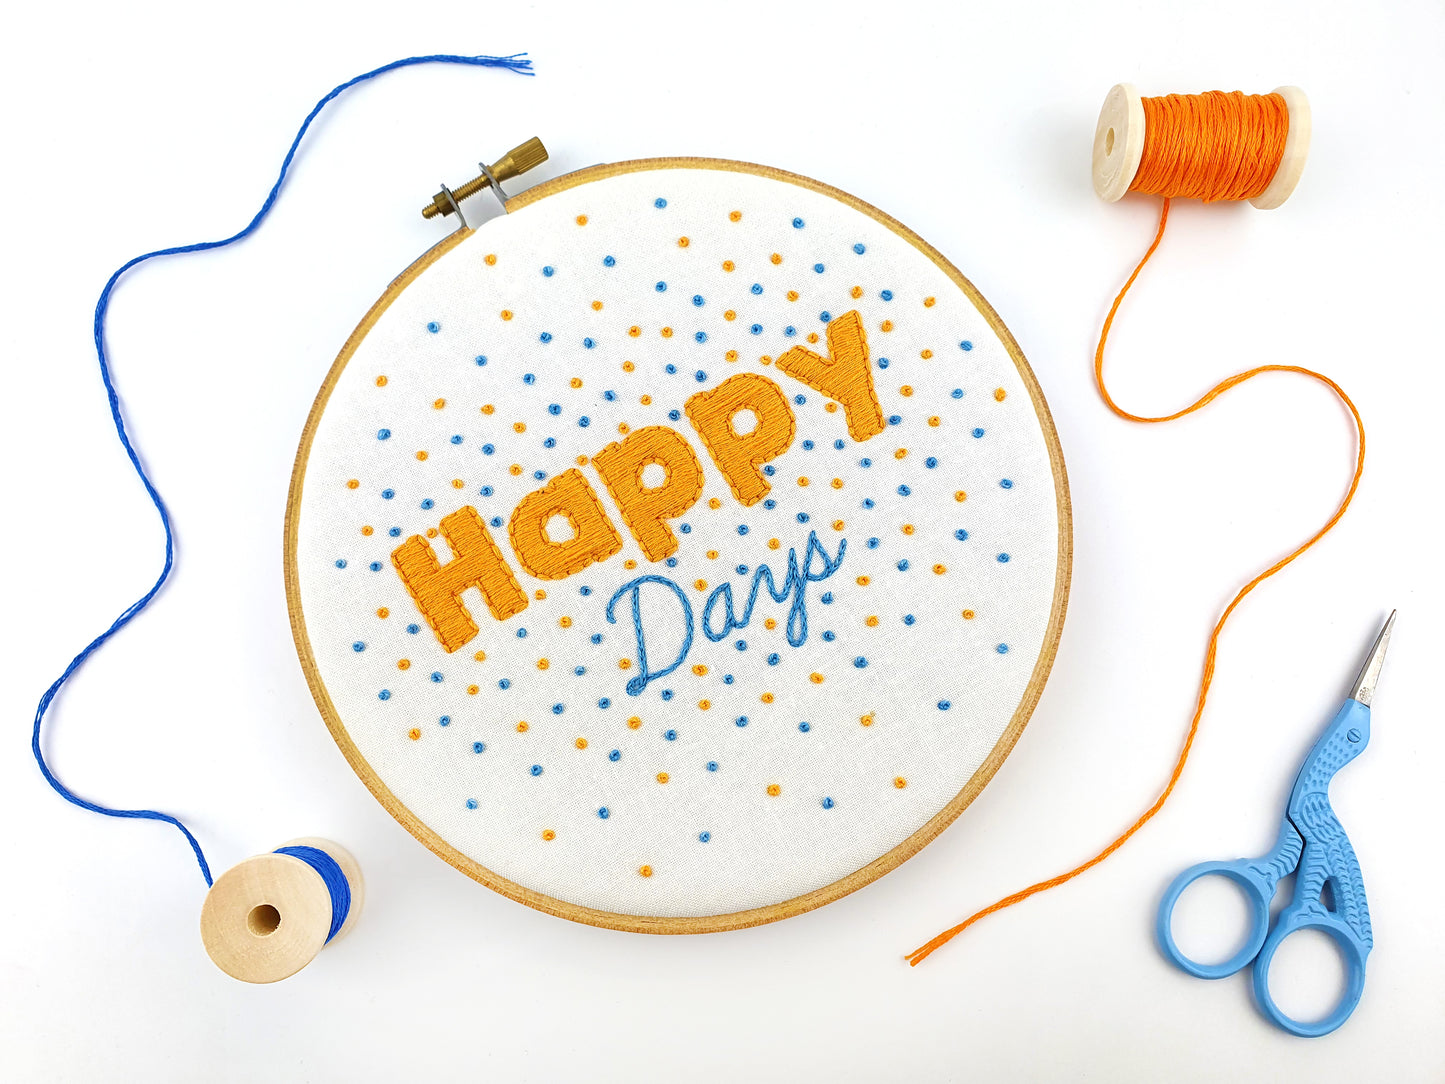 Happy Days Embroidery Fabric Pattern Pack - Fabric Packs - ohsewbootiful